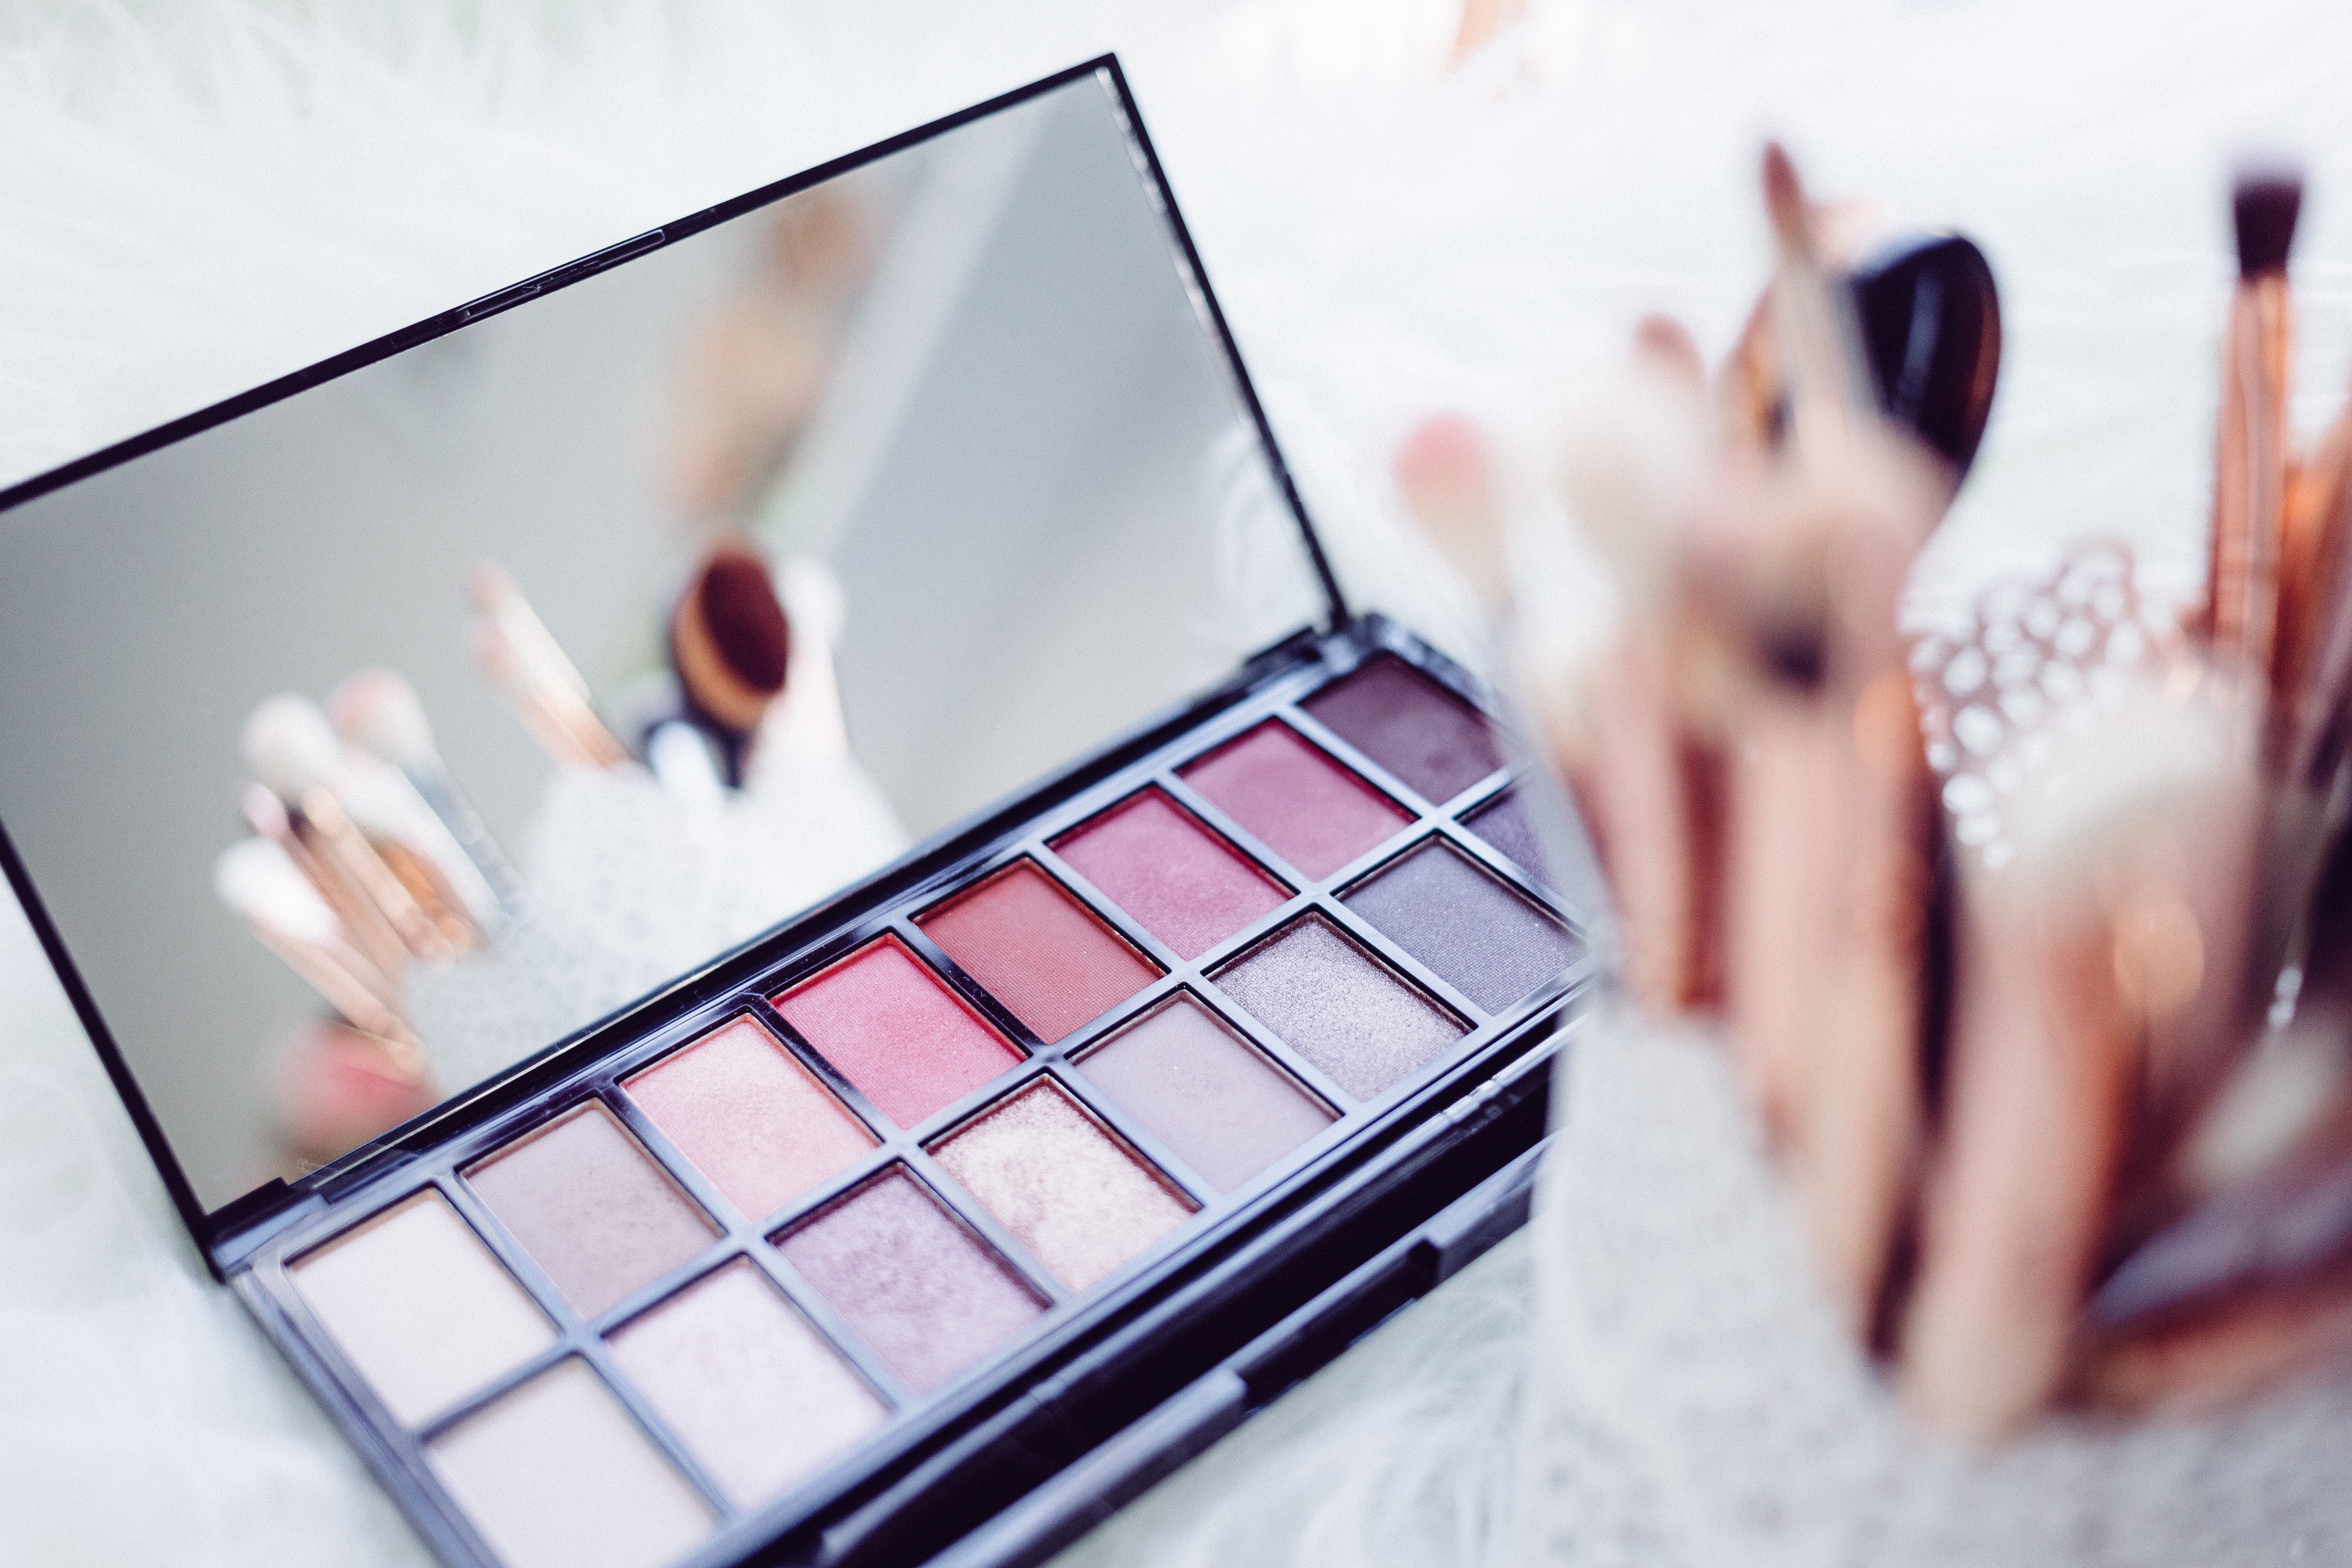 Find Hair And Makeup Artists in   Coogee Get the best prices from 2,000+ of the most reviewed Hair And Makeup Artists  near Coogee. Pick from mobile stylists or salons.